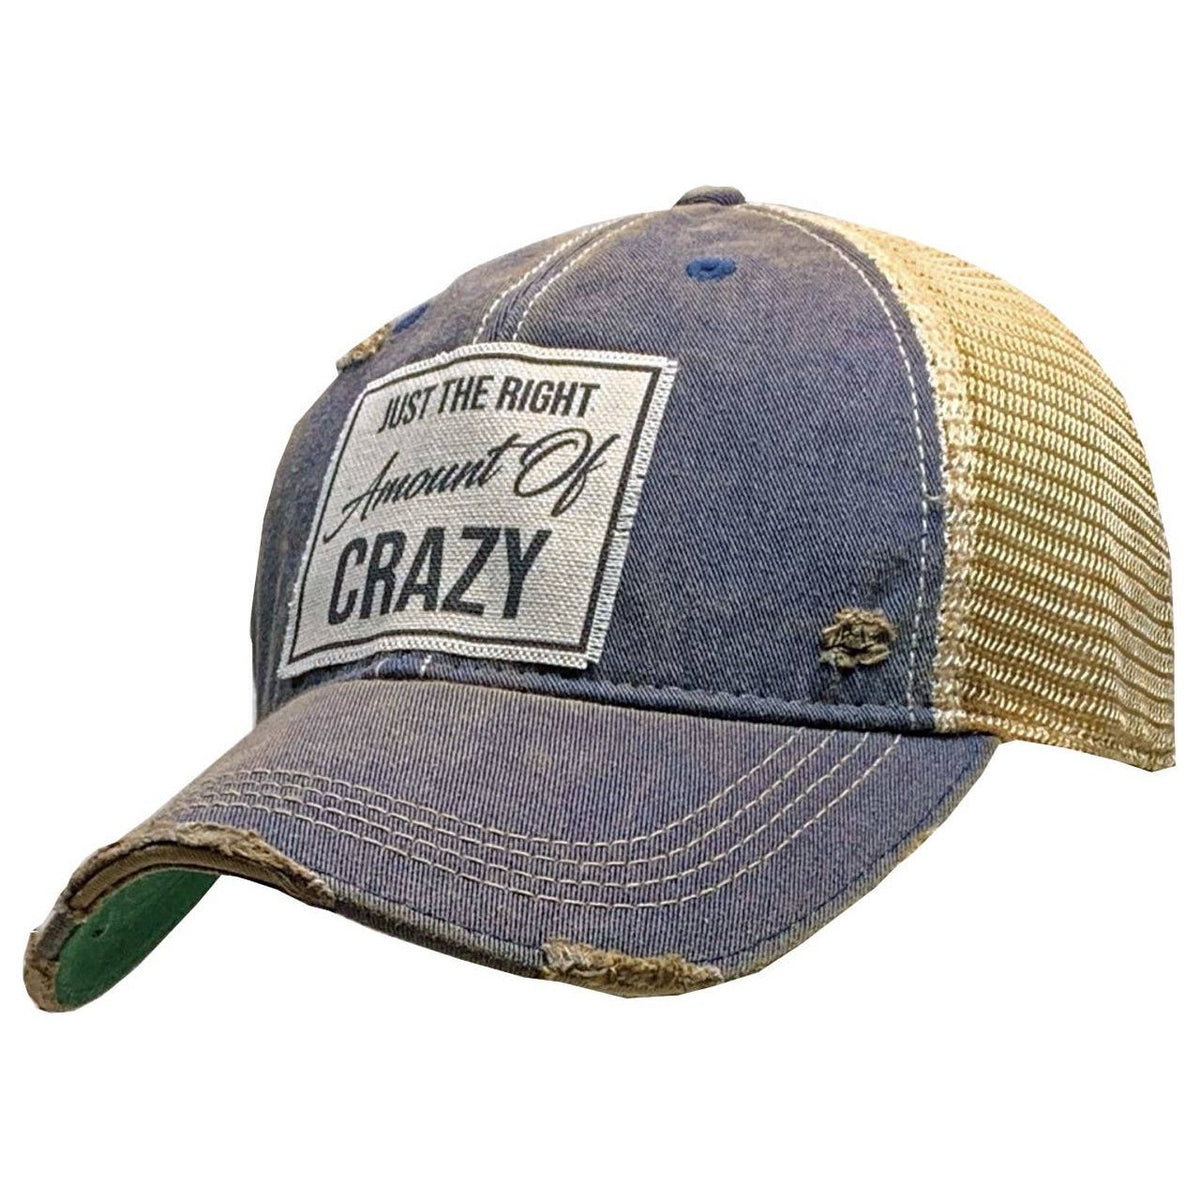 Just The Right Amount Of Crazy Trucker Hat Baseball Cap-Hats-[Womens_Boutique]-[NFR]-[Rodeo_Fashion]-[Western_Style]-Calamity's LLC